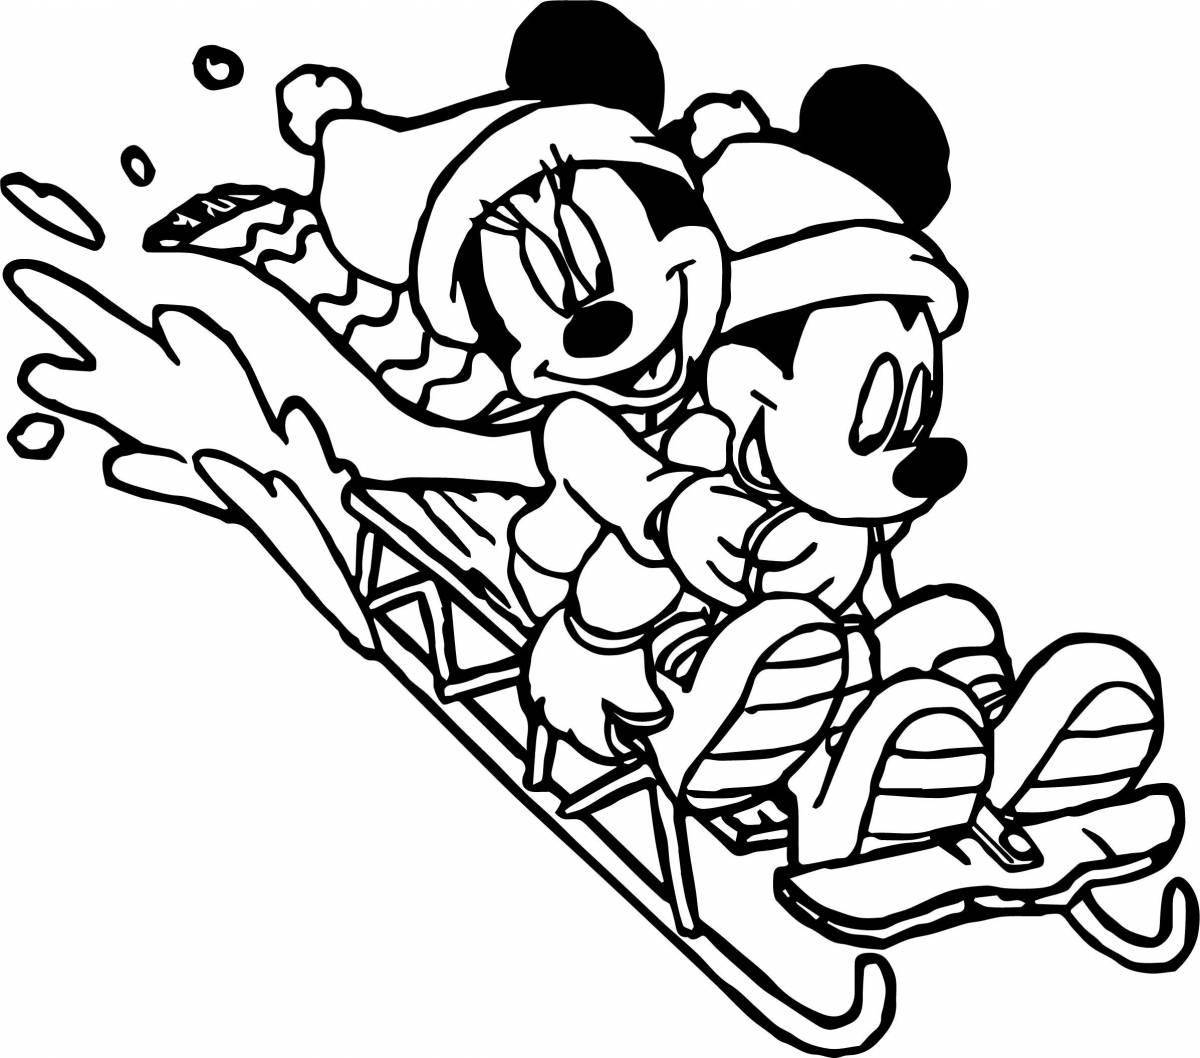 Coloring book glamorous mickey mouse new year